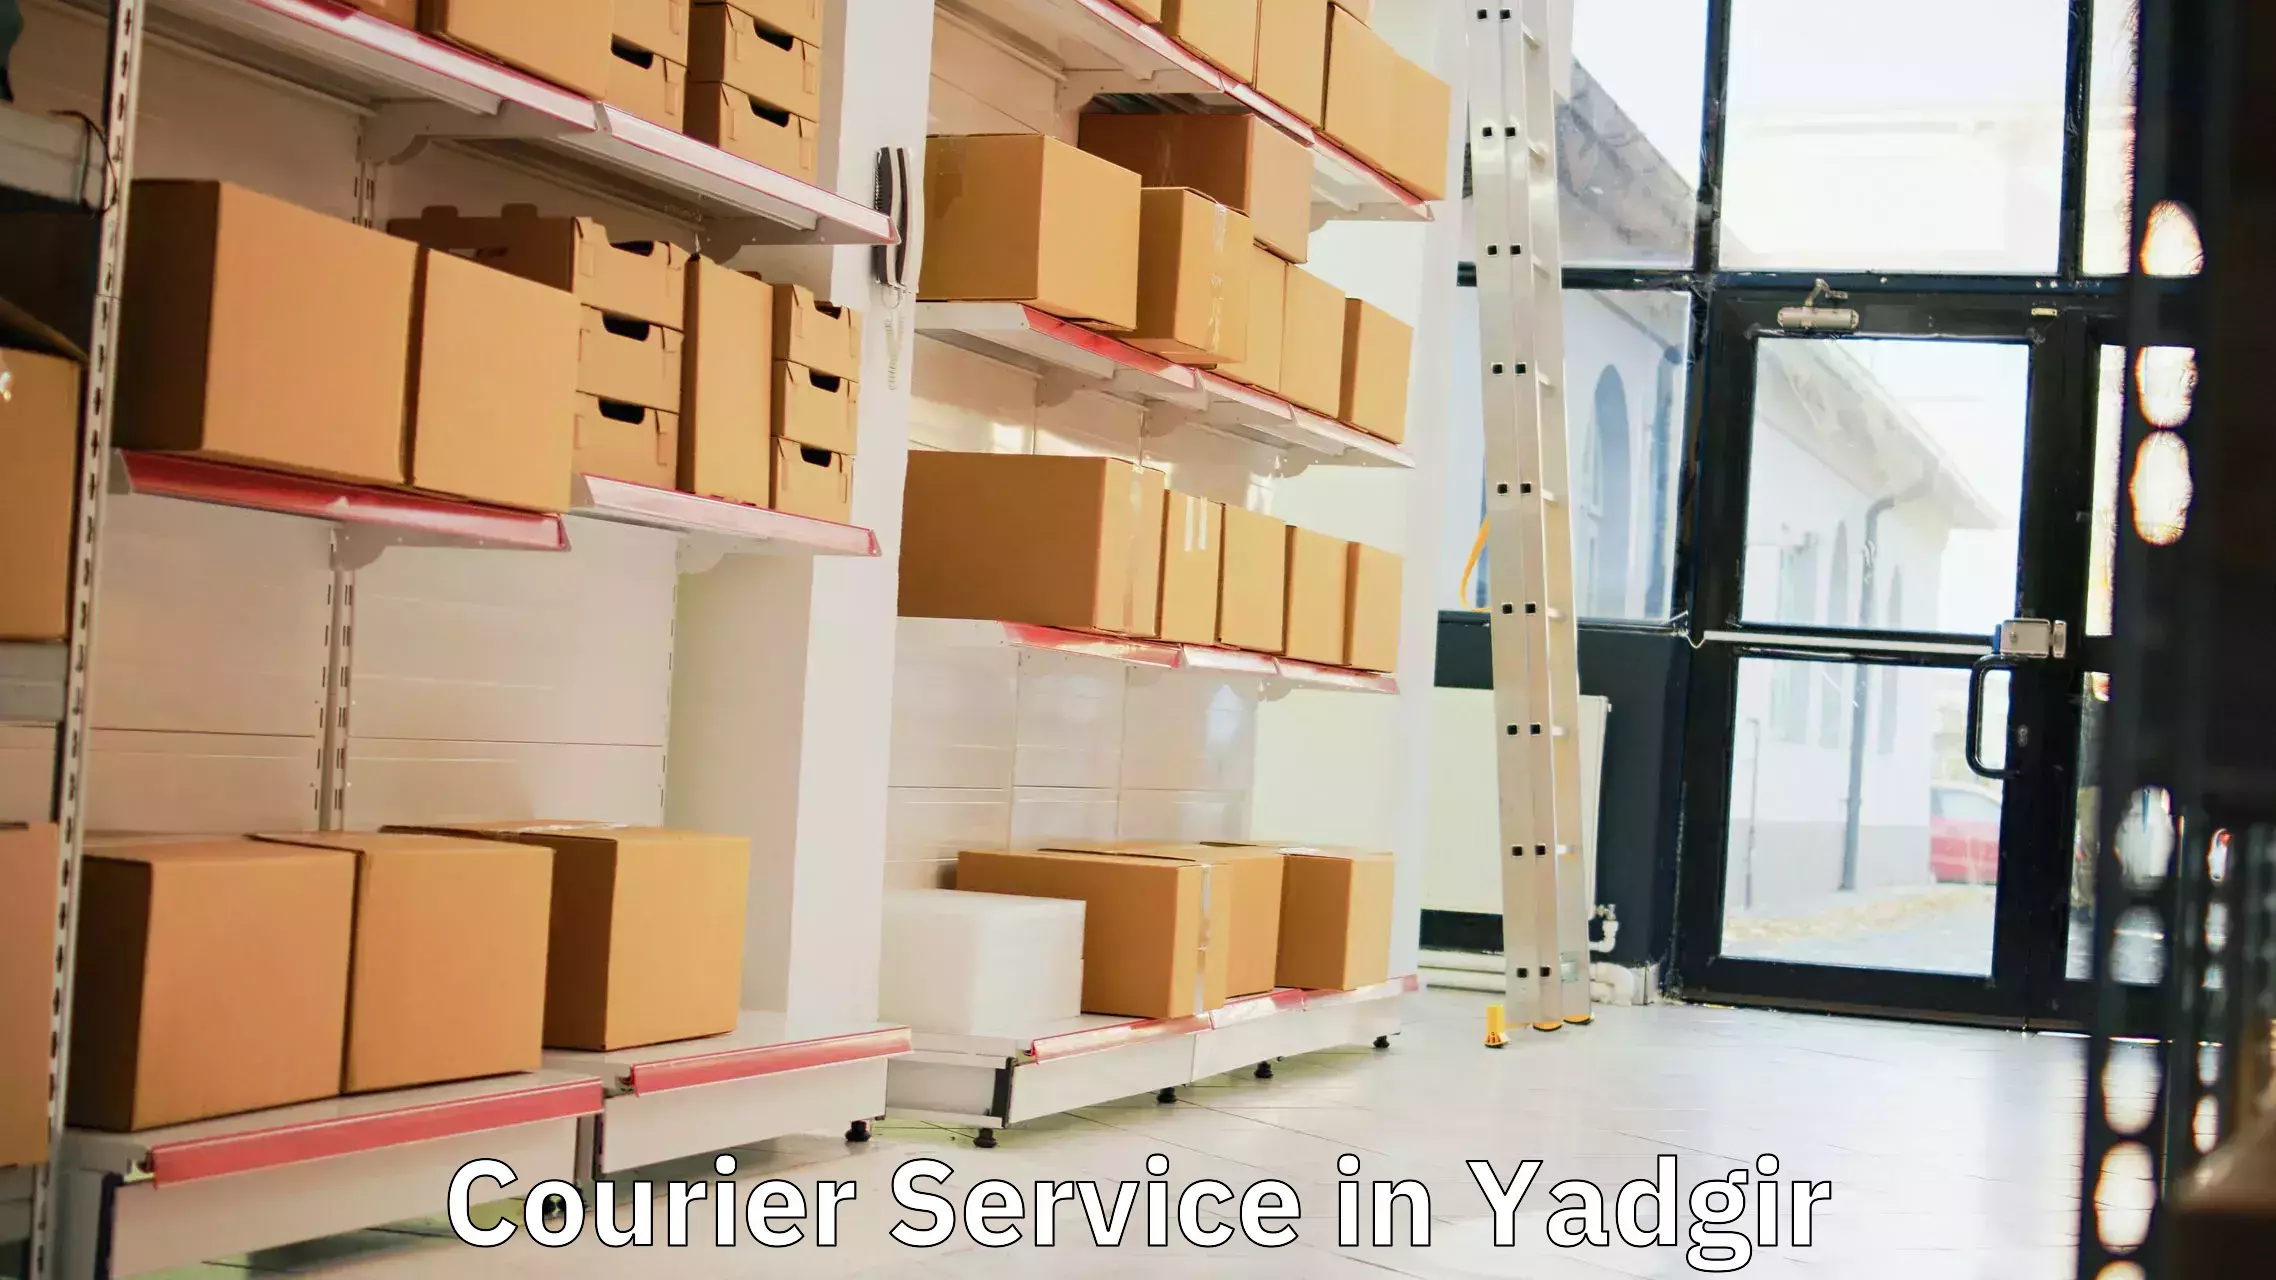 High value parcel delivery in Yadgir